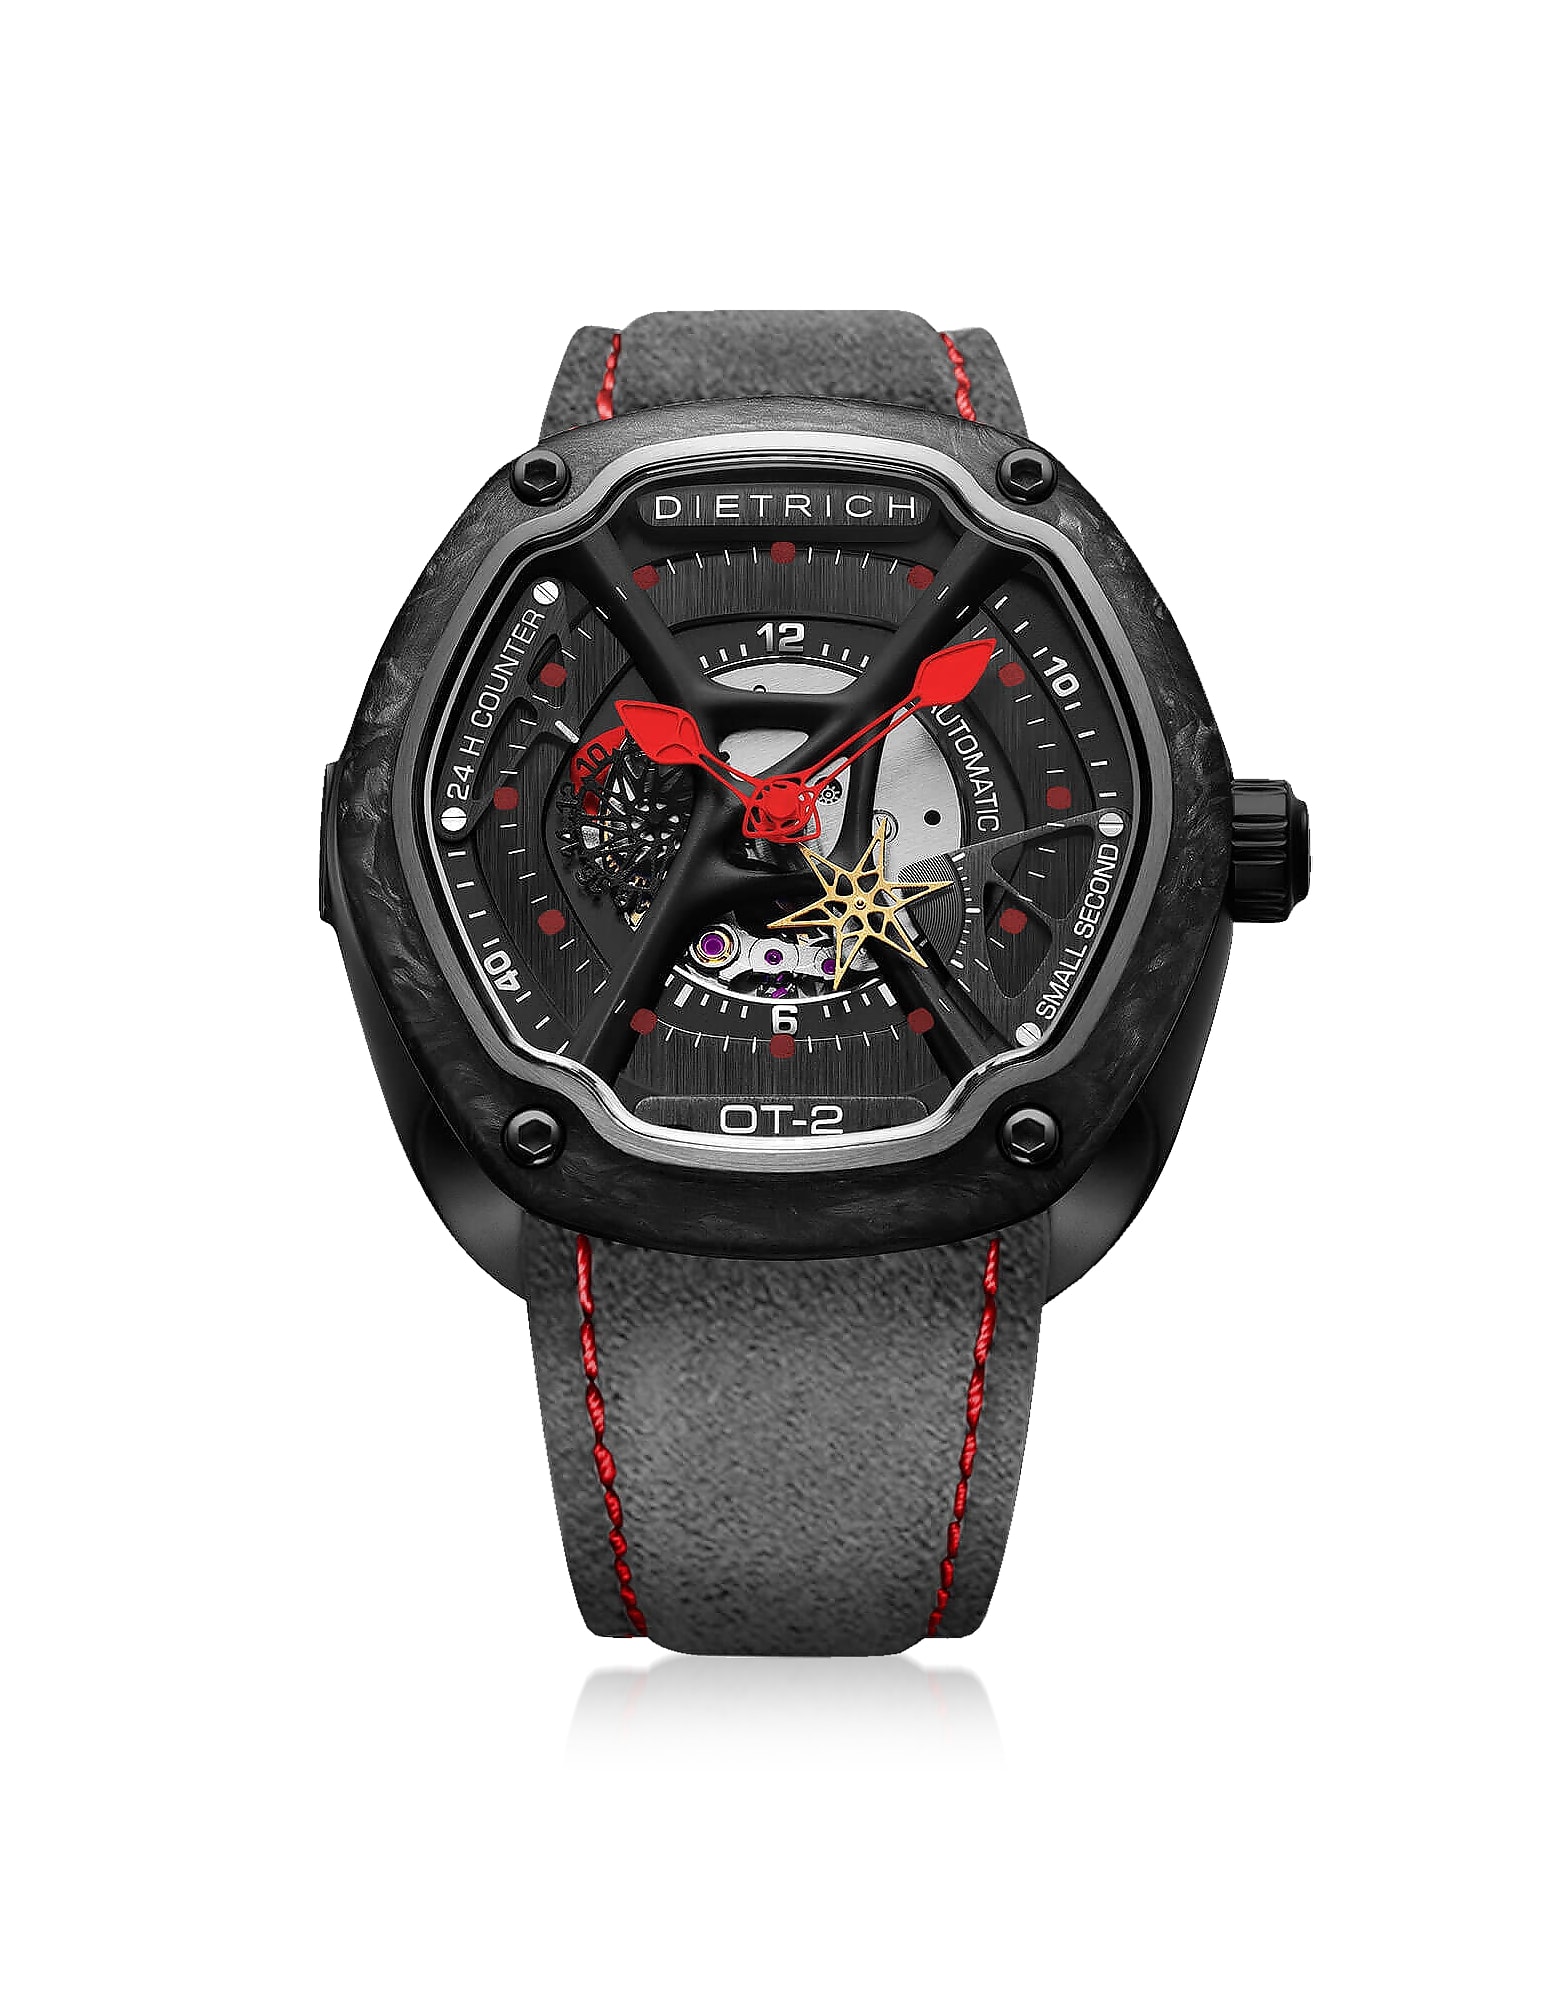 DIETRICH OT-2 316L STEEL AND FORGED CARBON MENS WATCH W/RED LUMINOVA AND GRAY SUEDE STRAP,11297991